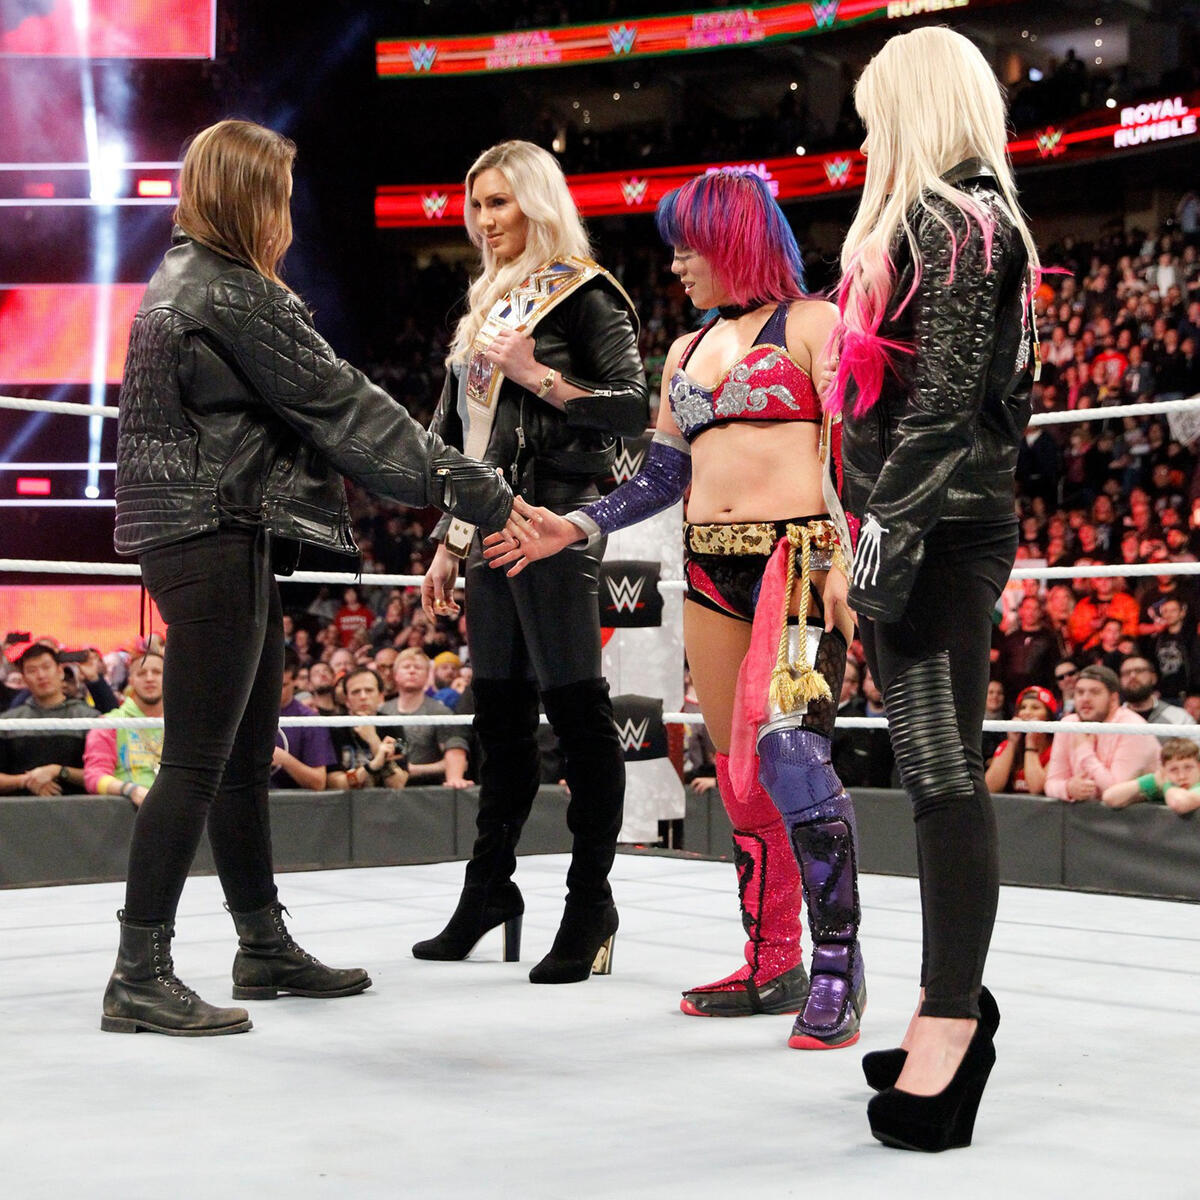 Asuka is not impressed by Rousey and refuses to shake her hand.